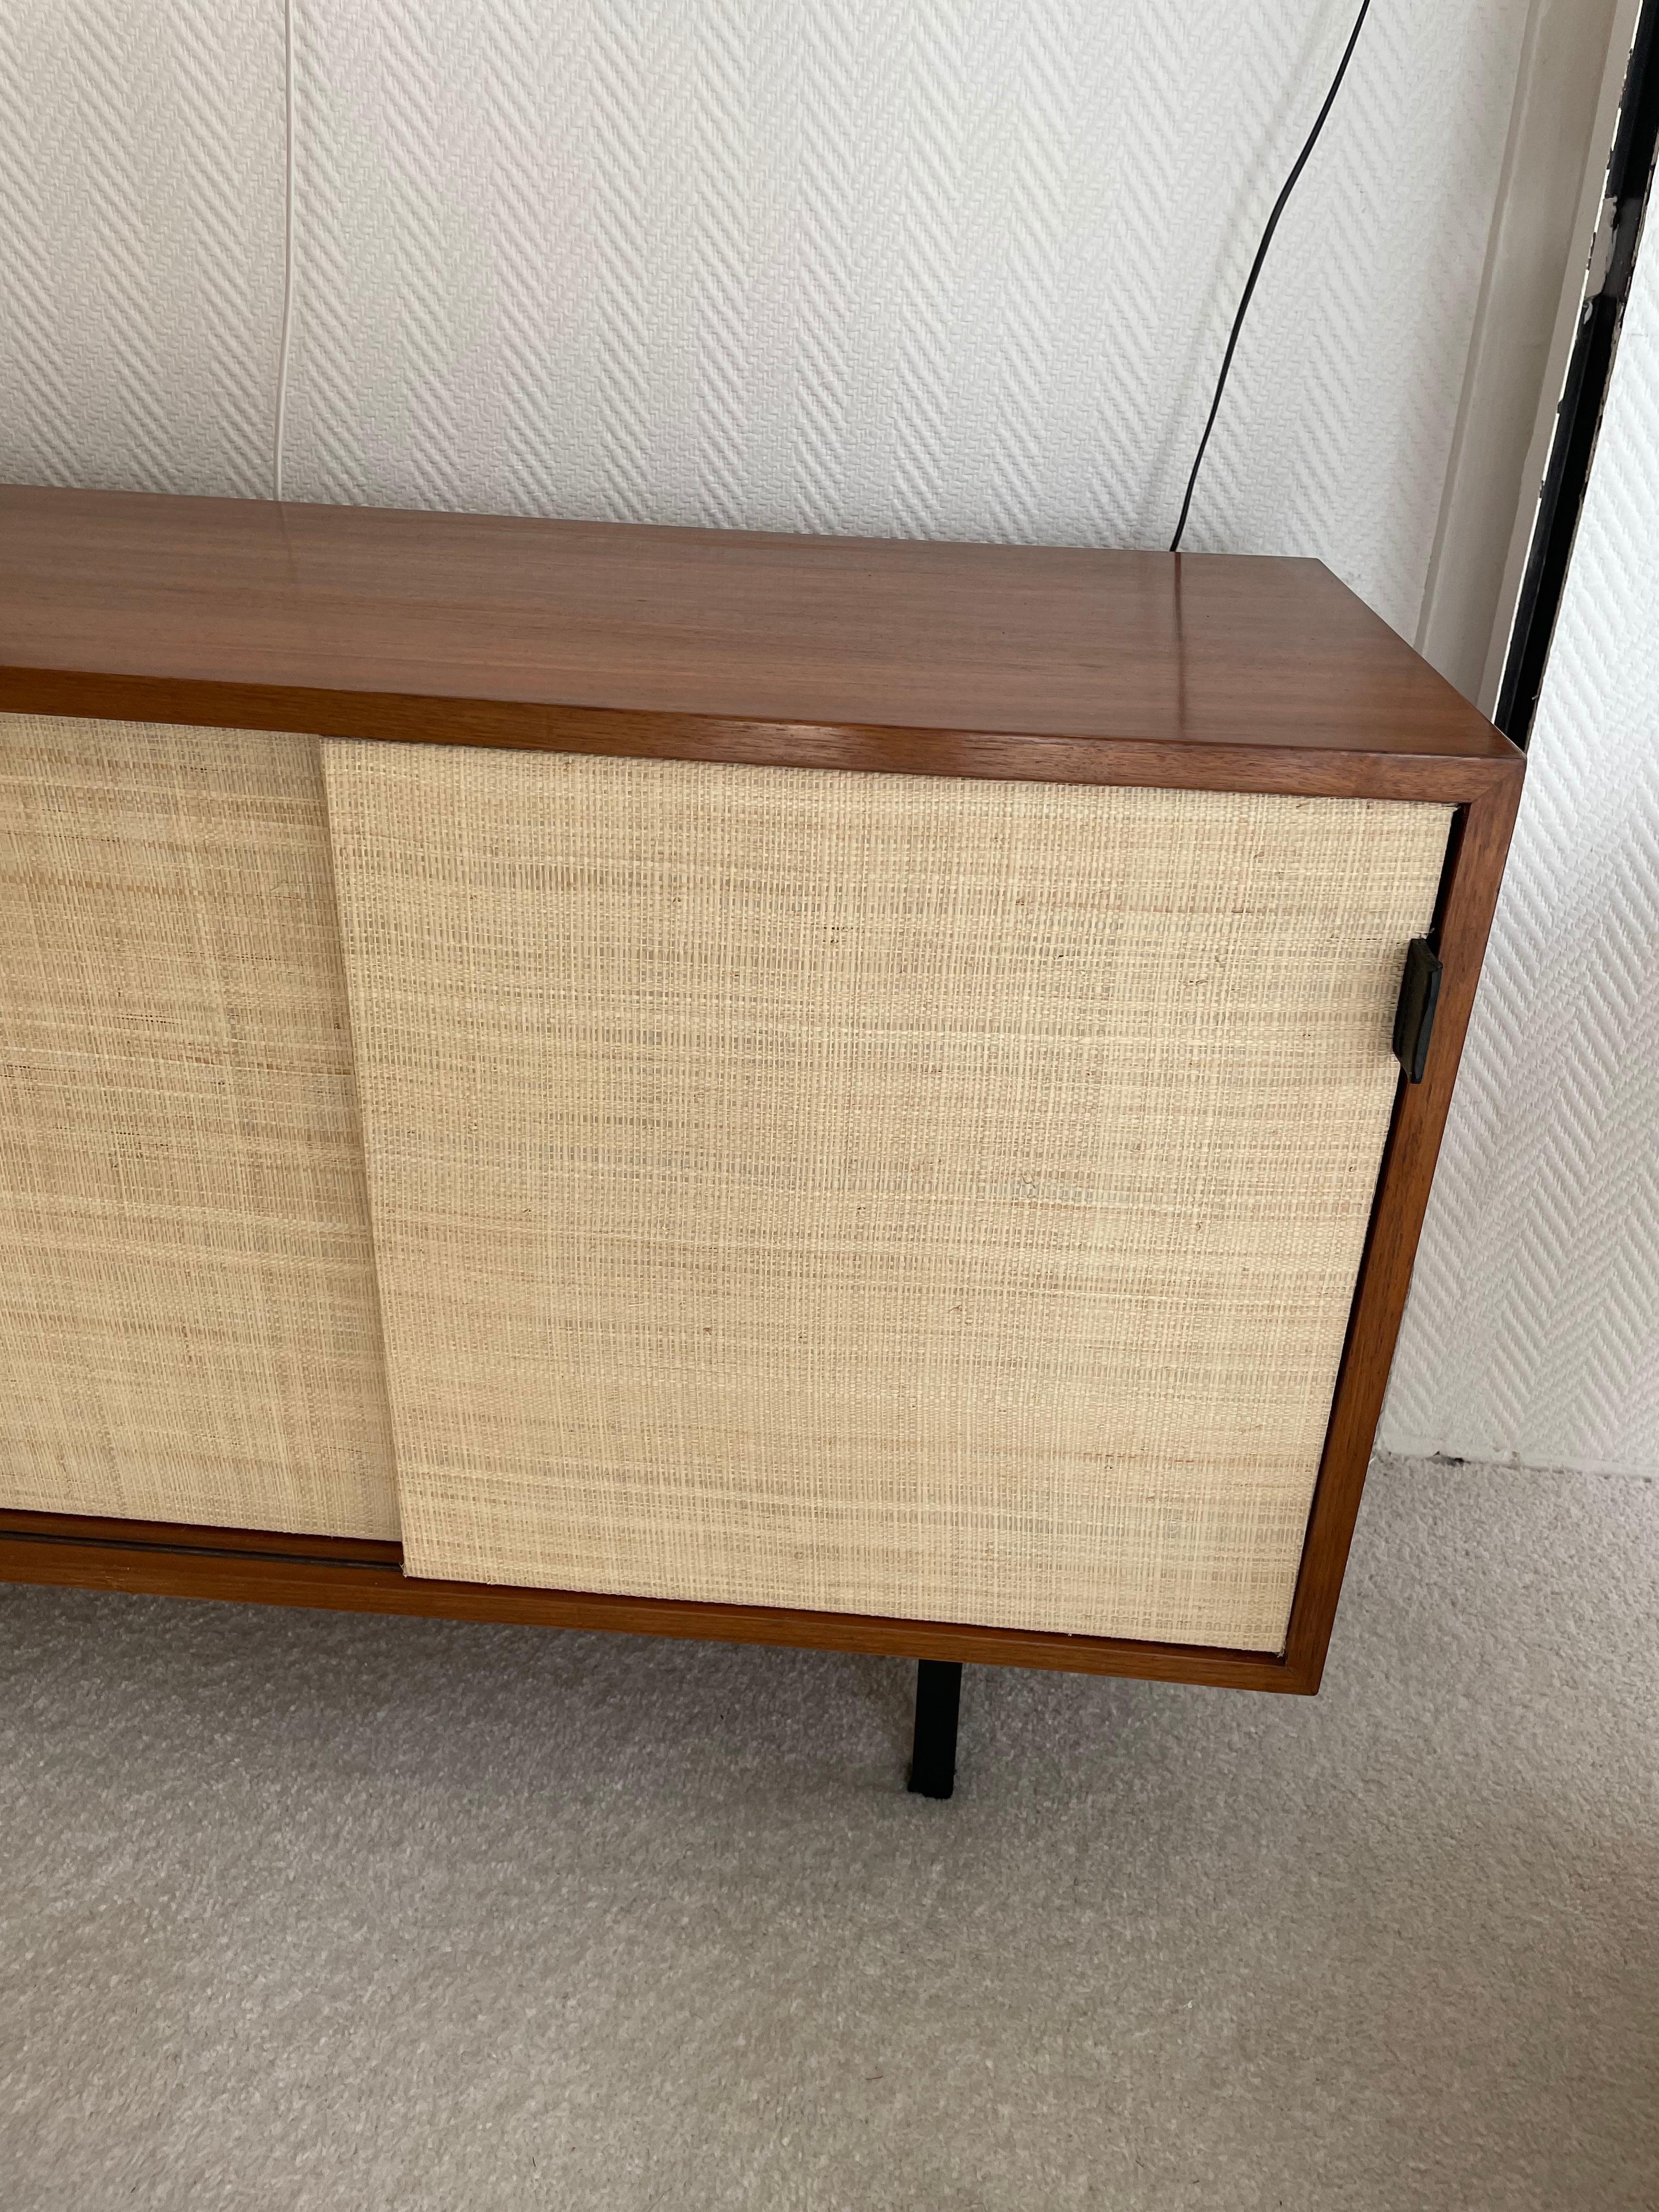 20th Century Sideboard by Knoll 1950